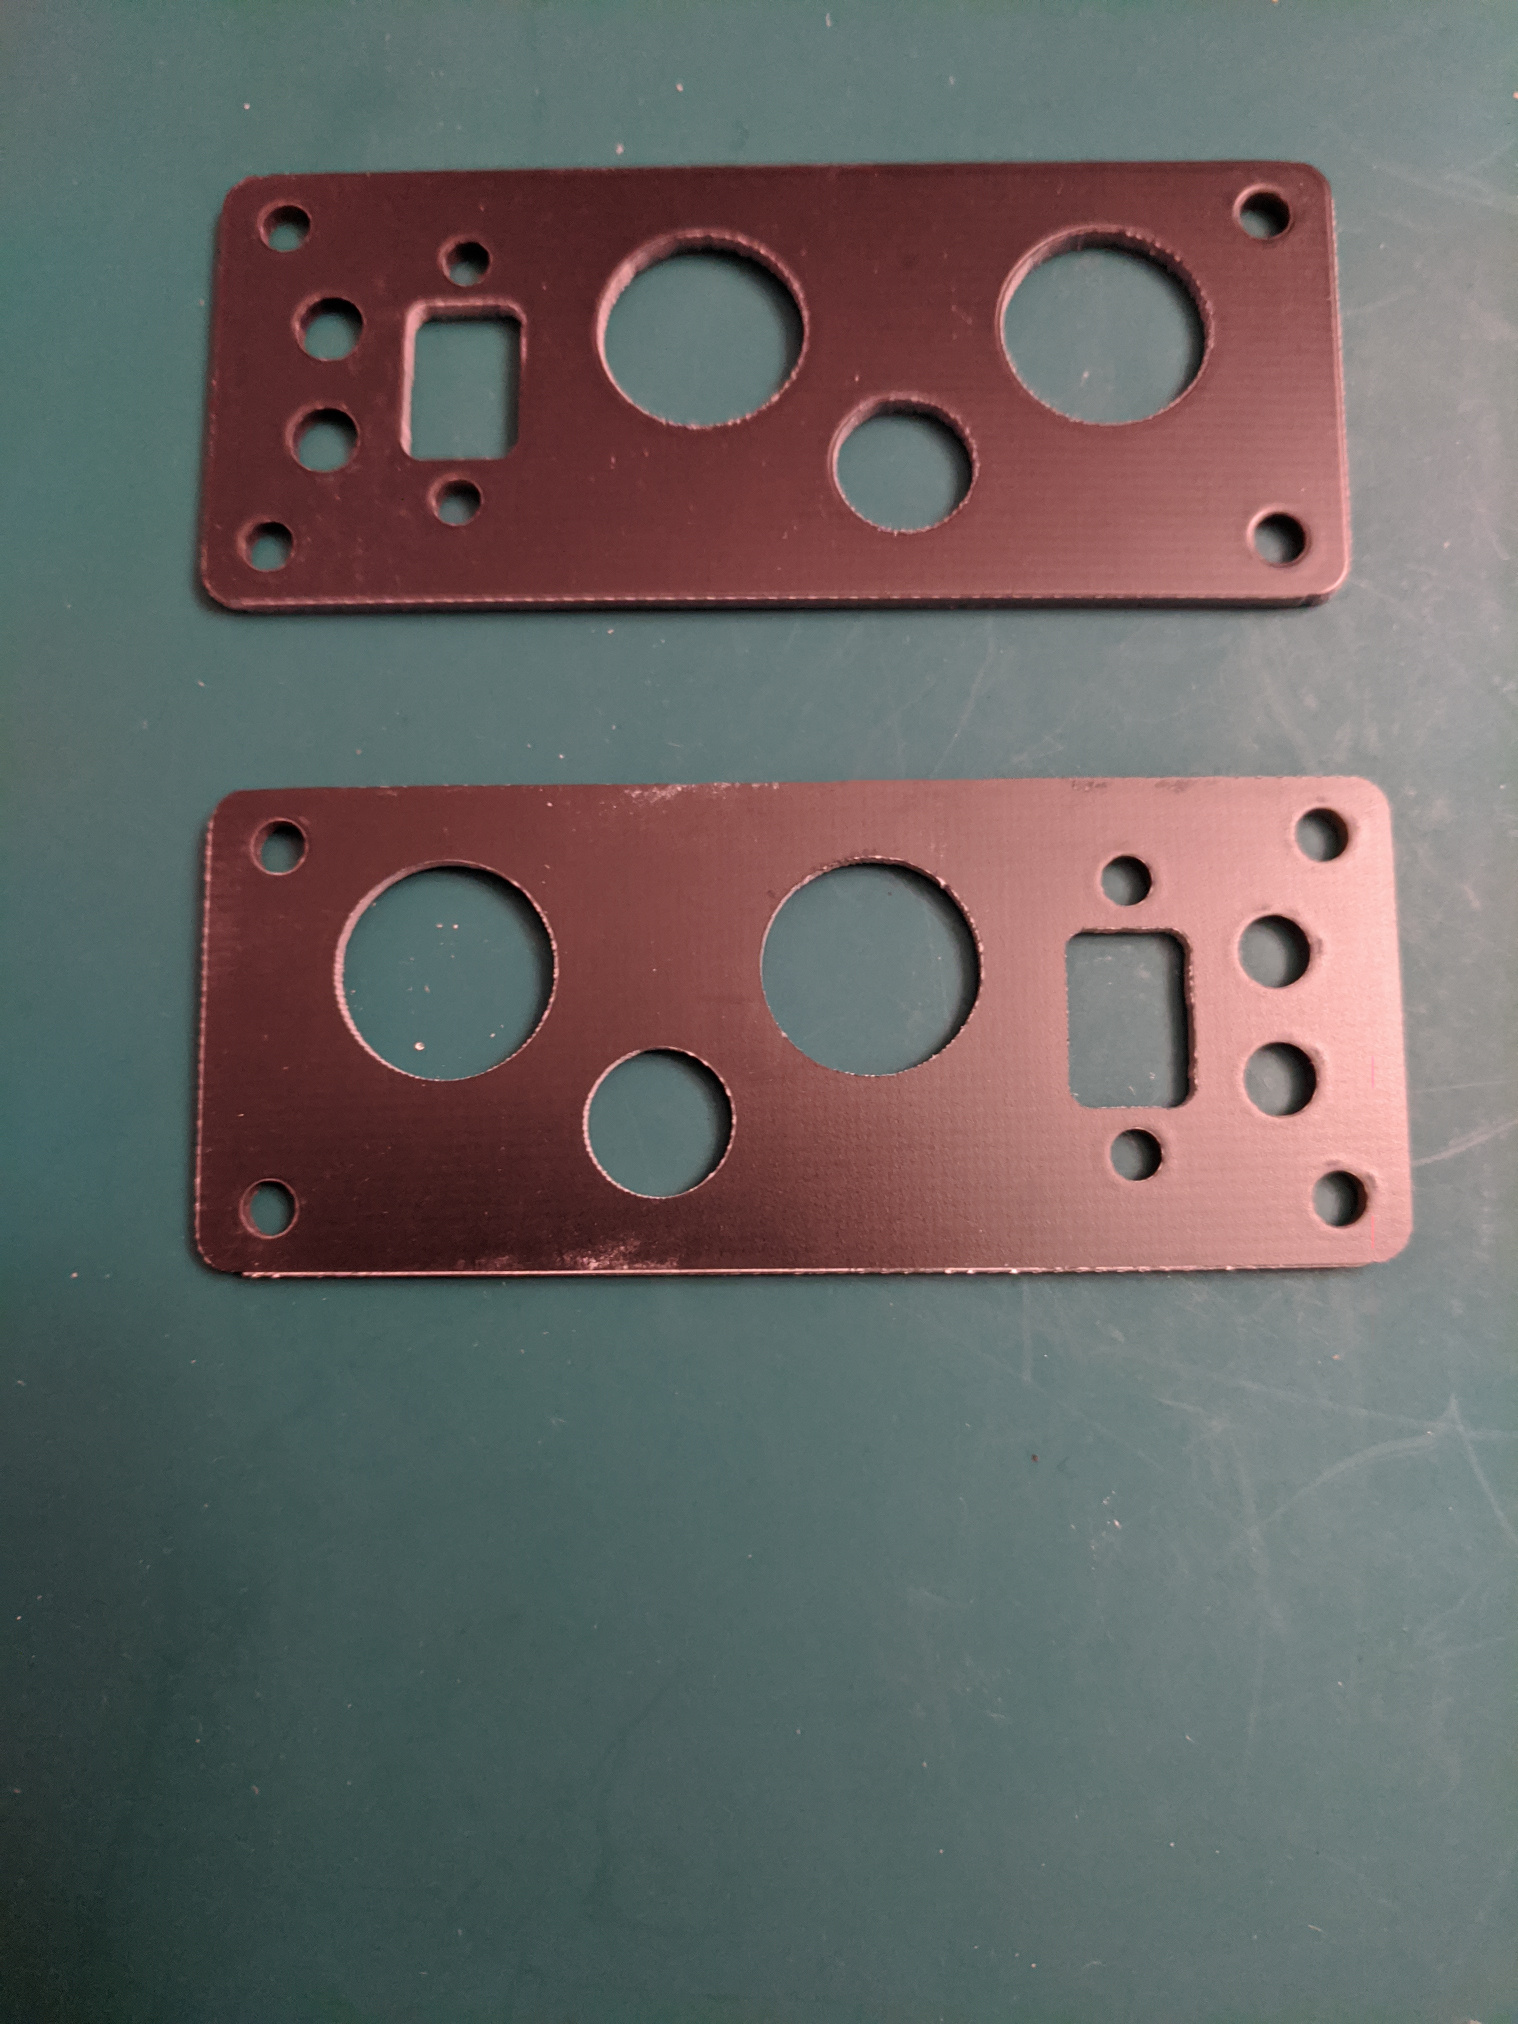 Project faceplates cut from PCB material.